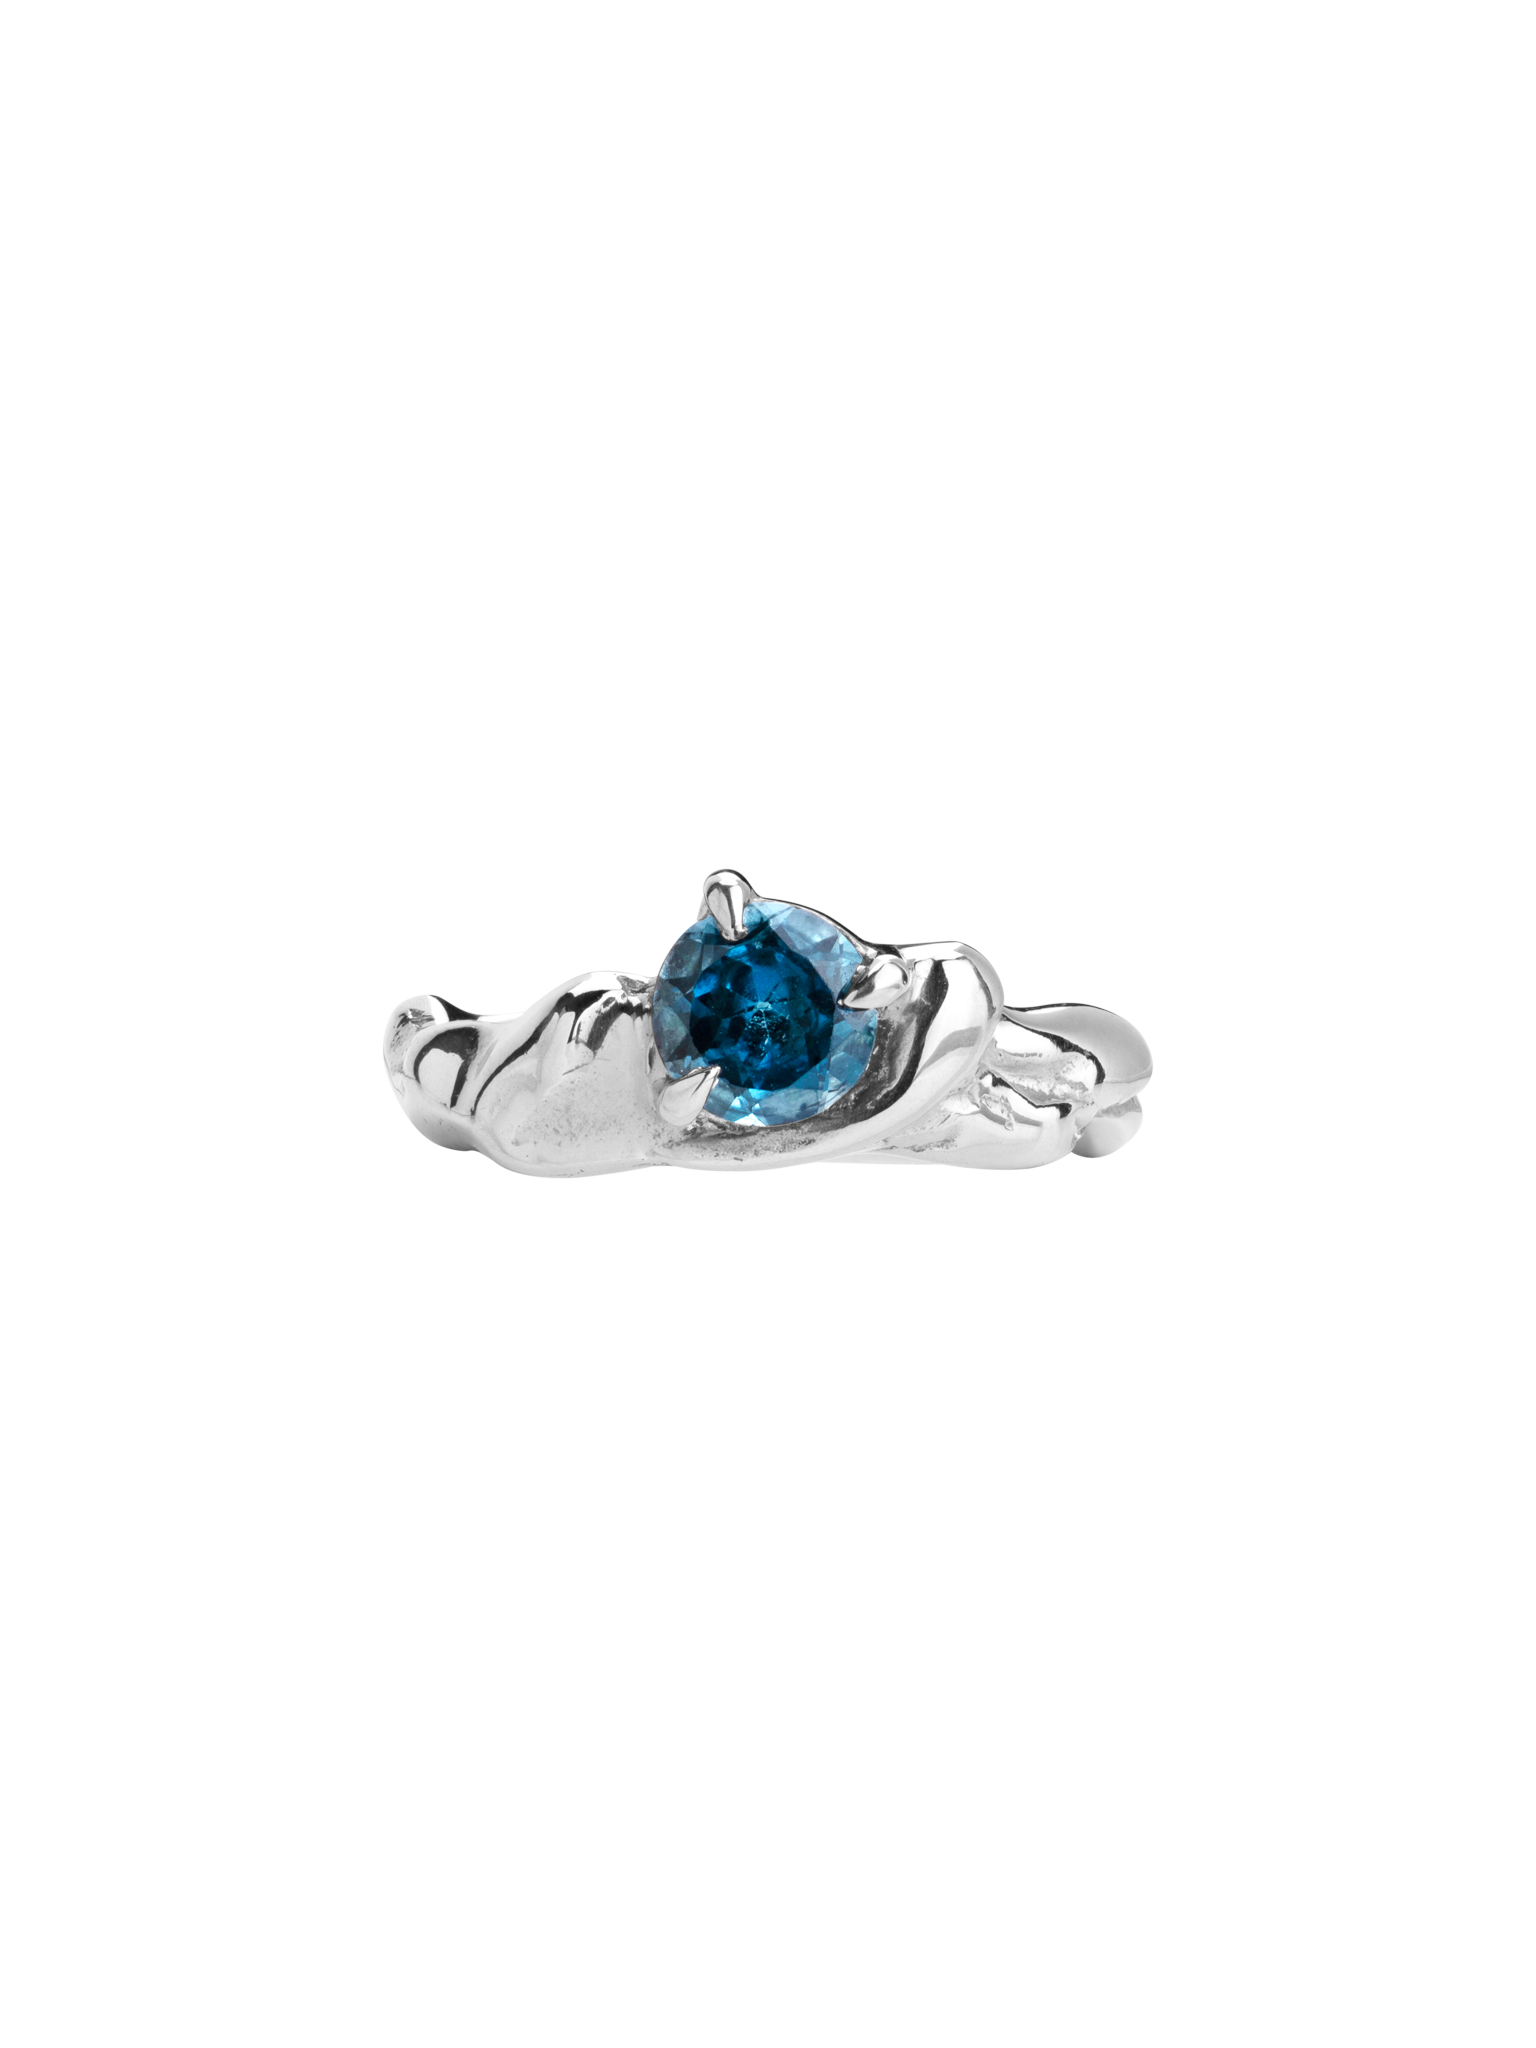 Buy Blue topaz Natural Gemstone Panch Dhatu silver Coated adjustable ring  For Men and Women Weight 8.25 Ratti With Lab Certificate at Amazon.in